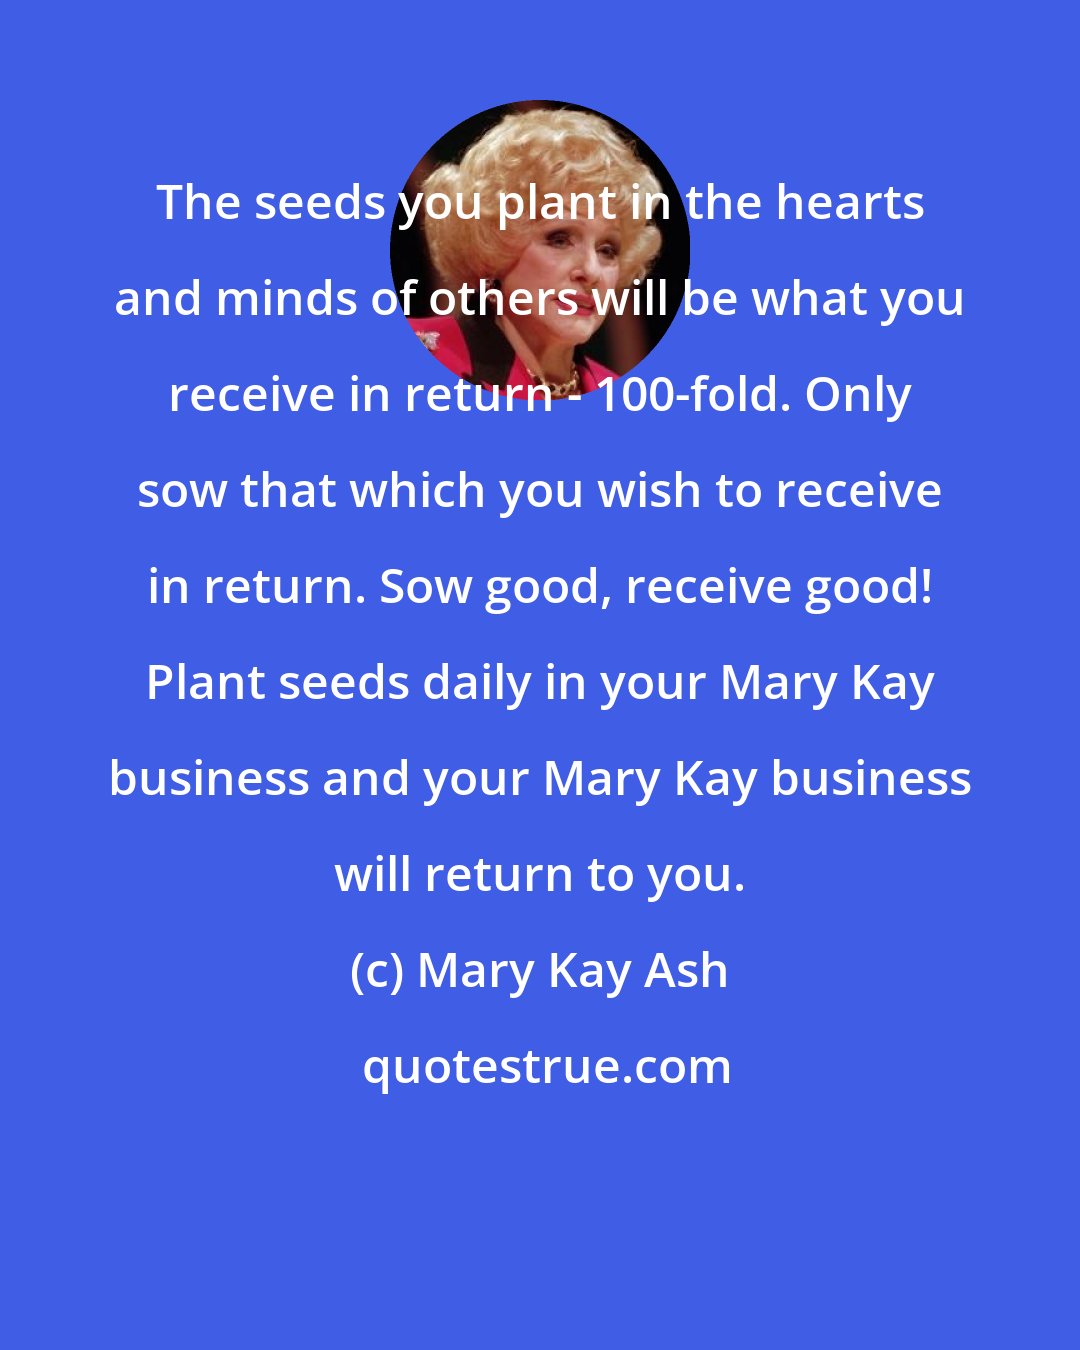 Mary Kay Ash: The seeds you plant in the hearts and minds of others will be what you receive in return - 100-fold. Only sow that which you wish to receive in return. Sow good, receive good! Plant seeds daily in your Mary Kay business and your Mary Kay business will return to you.